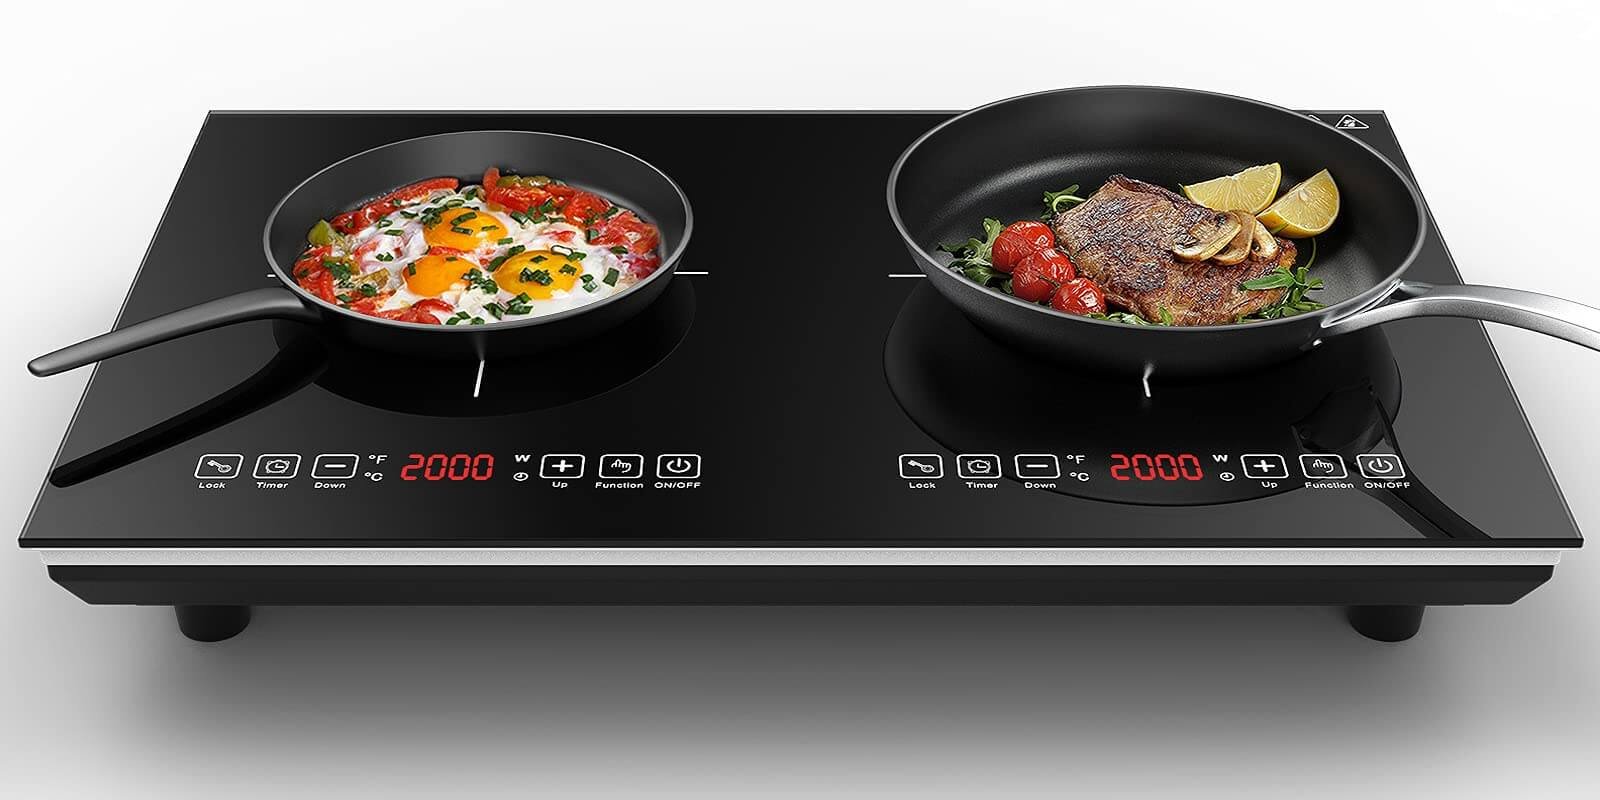 Induction cooktops